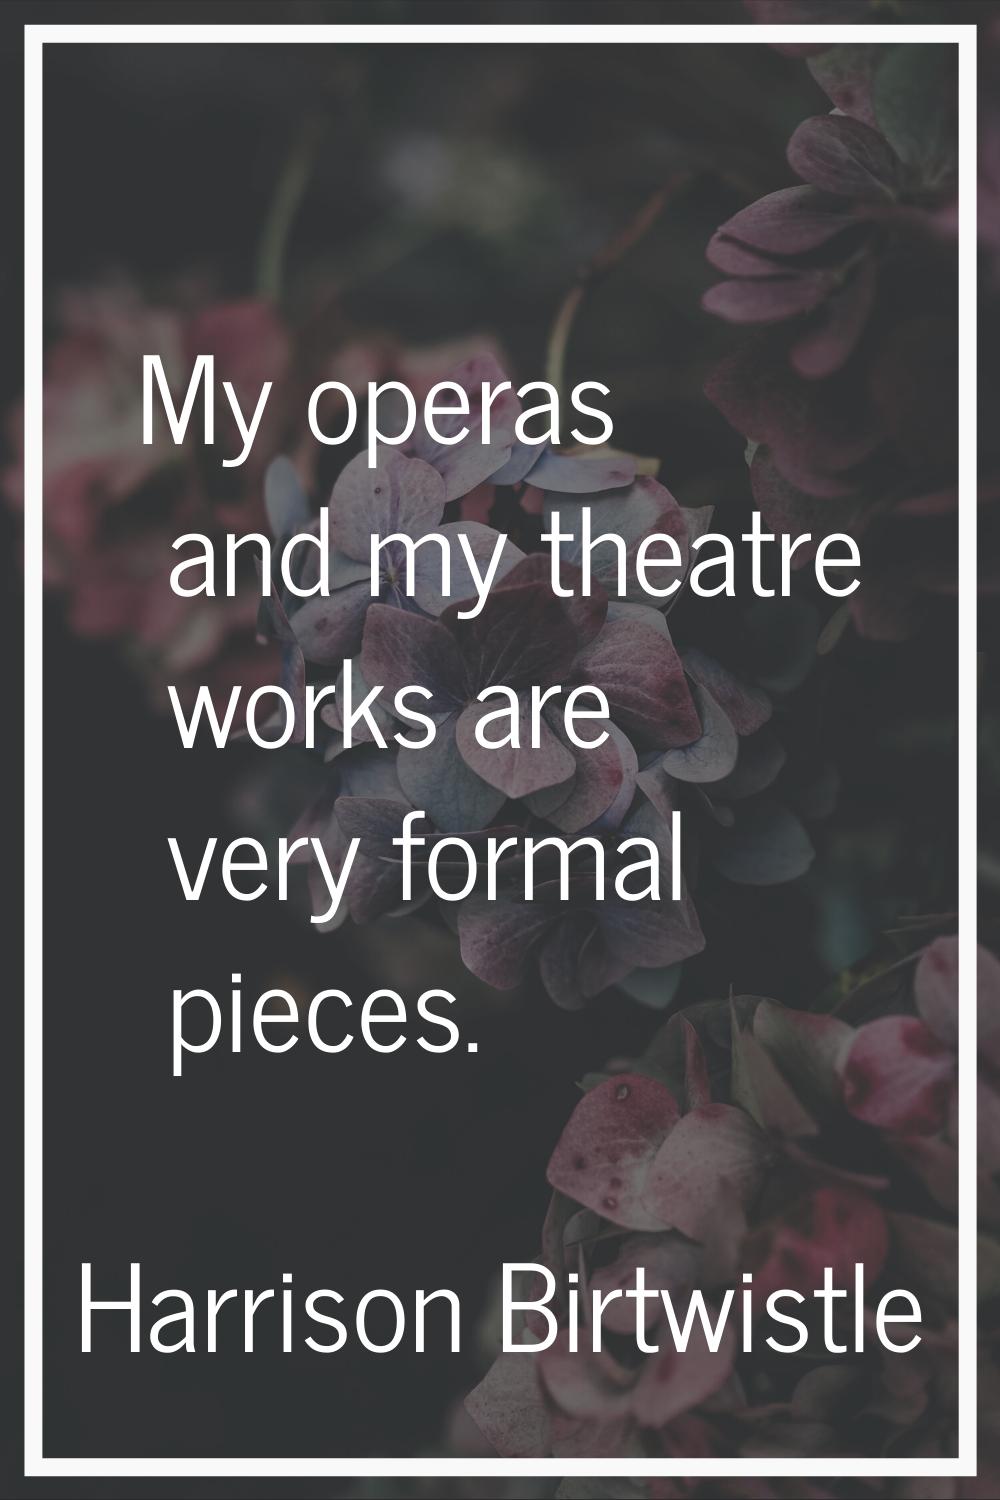 My operas and my theatre works are very formal pieces.